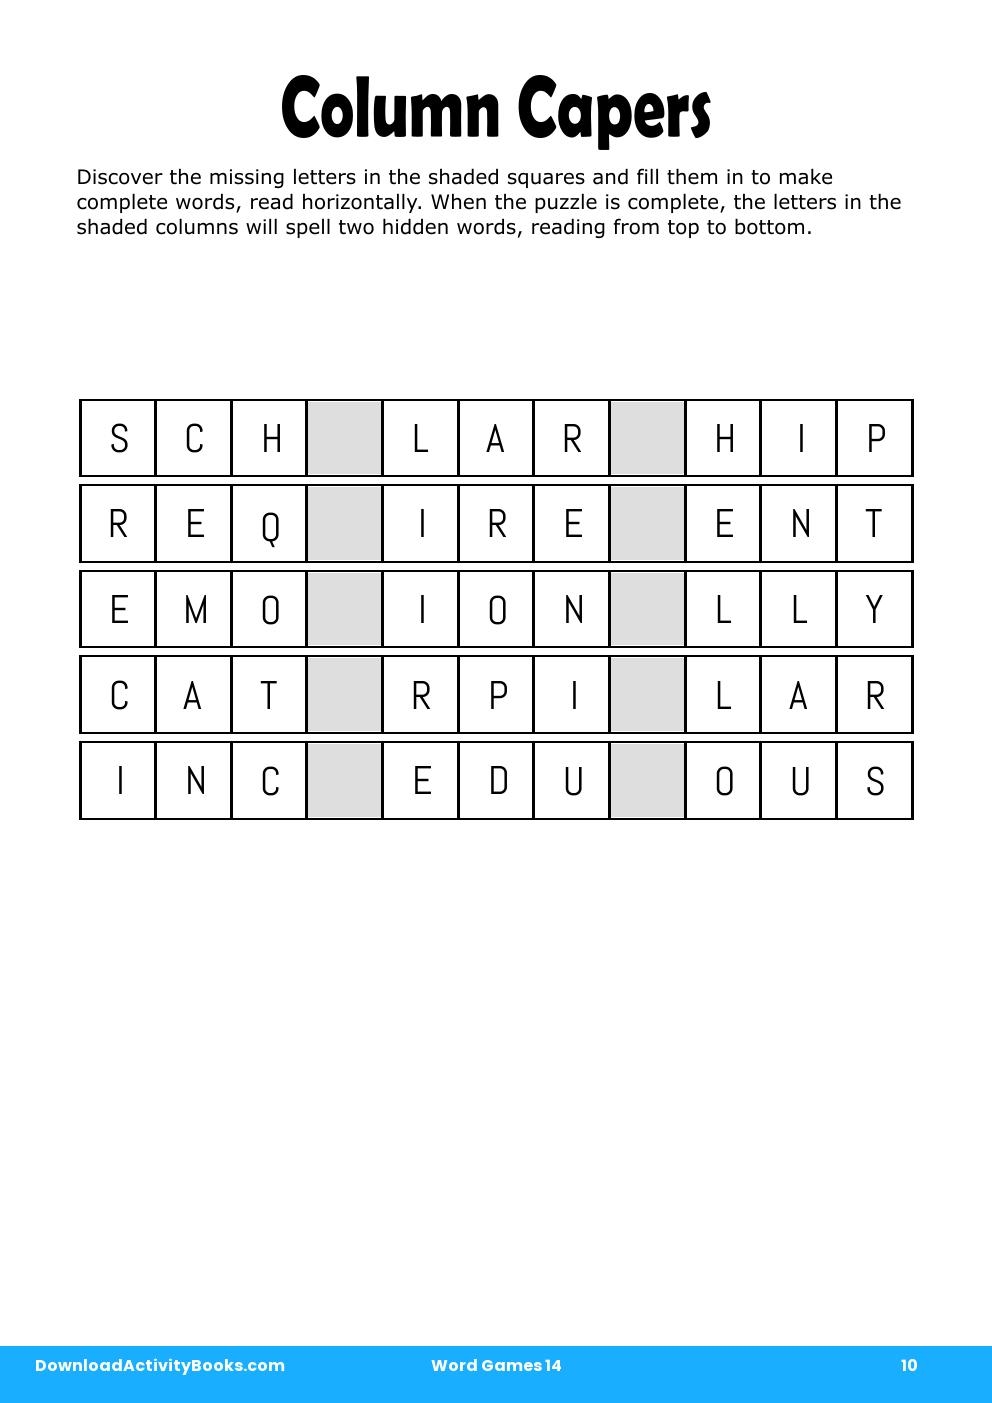 Column Capers in Word Games 14